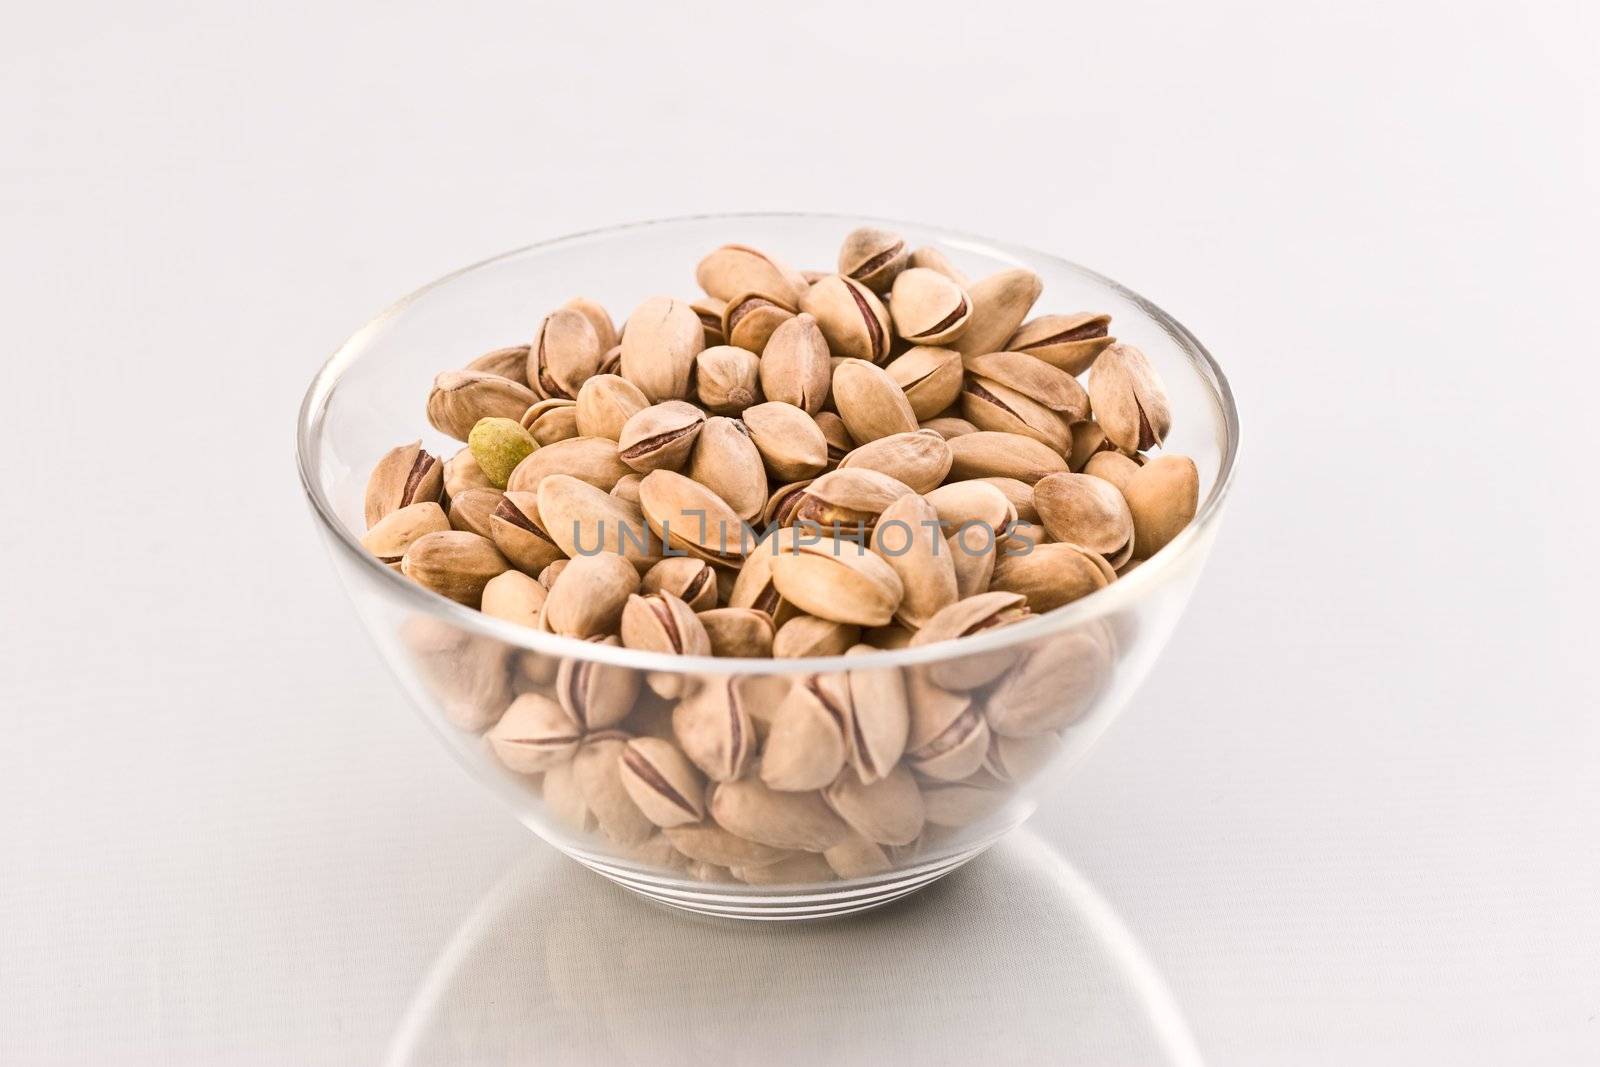 food serias: full bowl with pistachio nuts